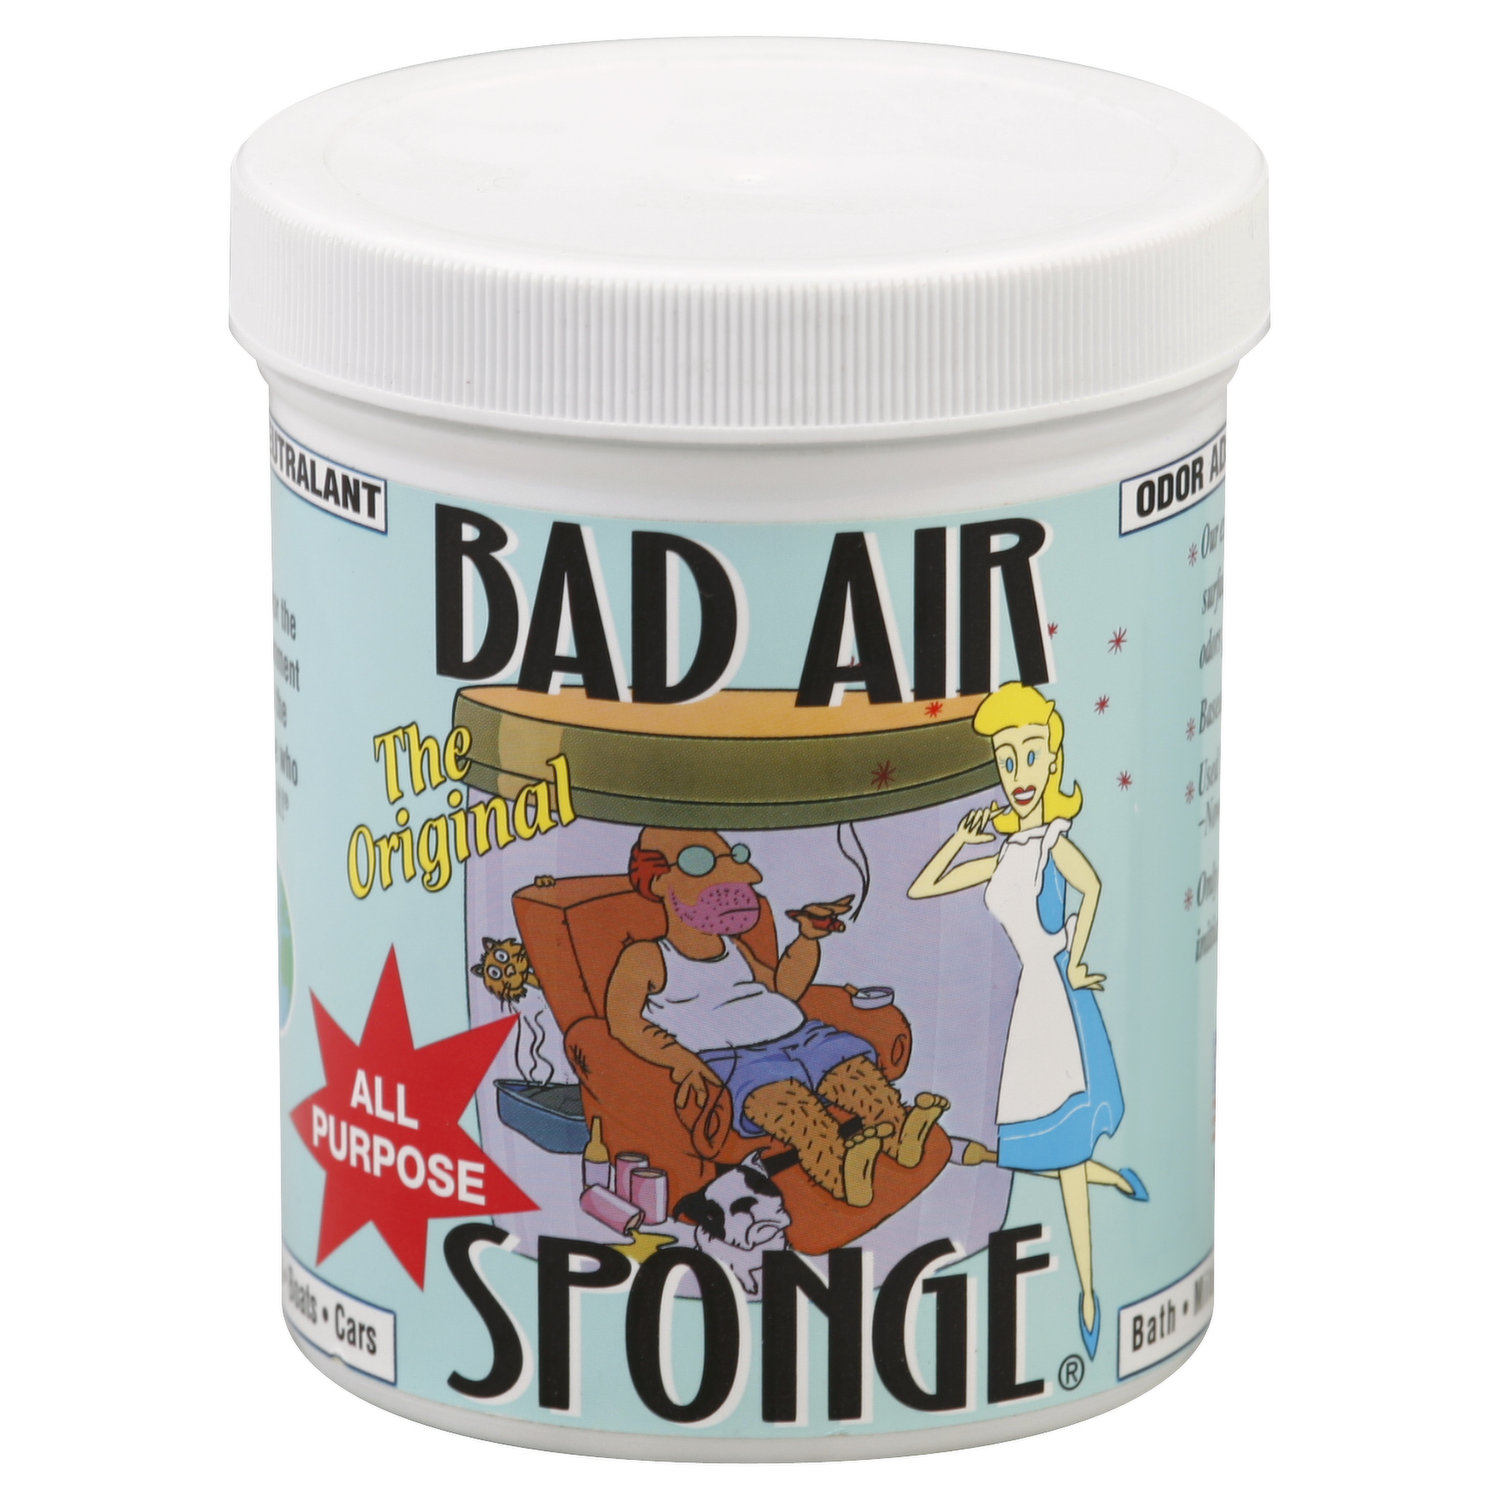 Bad Air Sponge Odor Neutralizer 2lb. Container (2-Pack) FREE SHIPPING